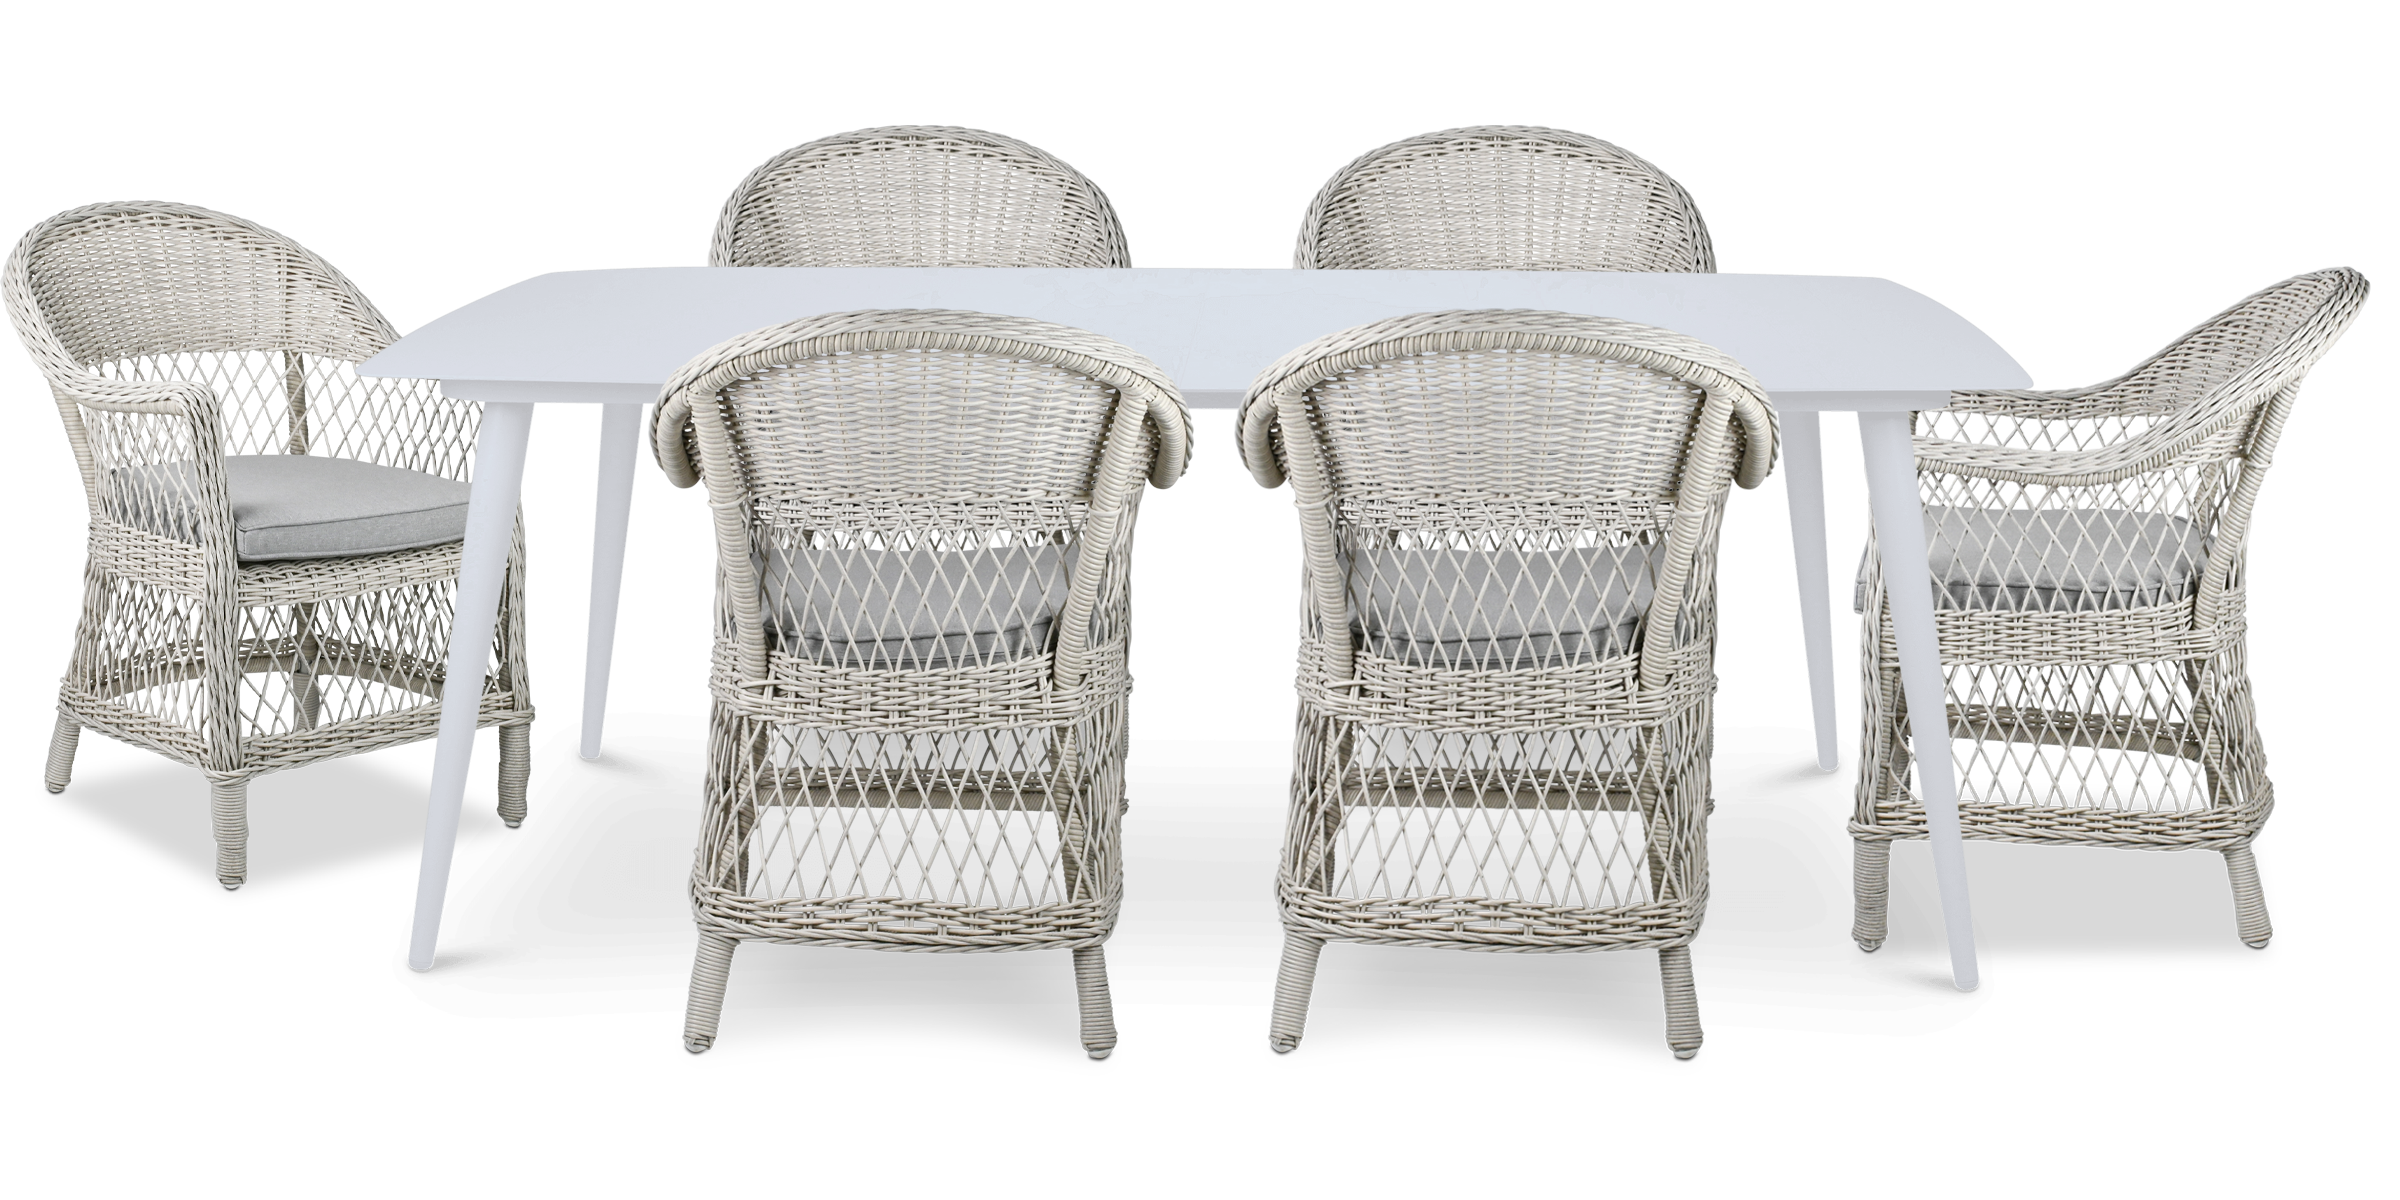 Amalfi Rectangle 7 Piece Outdoor Setting in Arctic White with Wicker Chairs